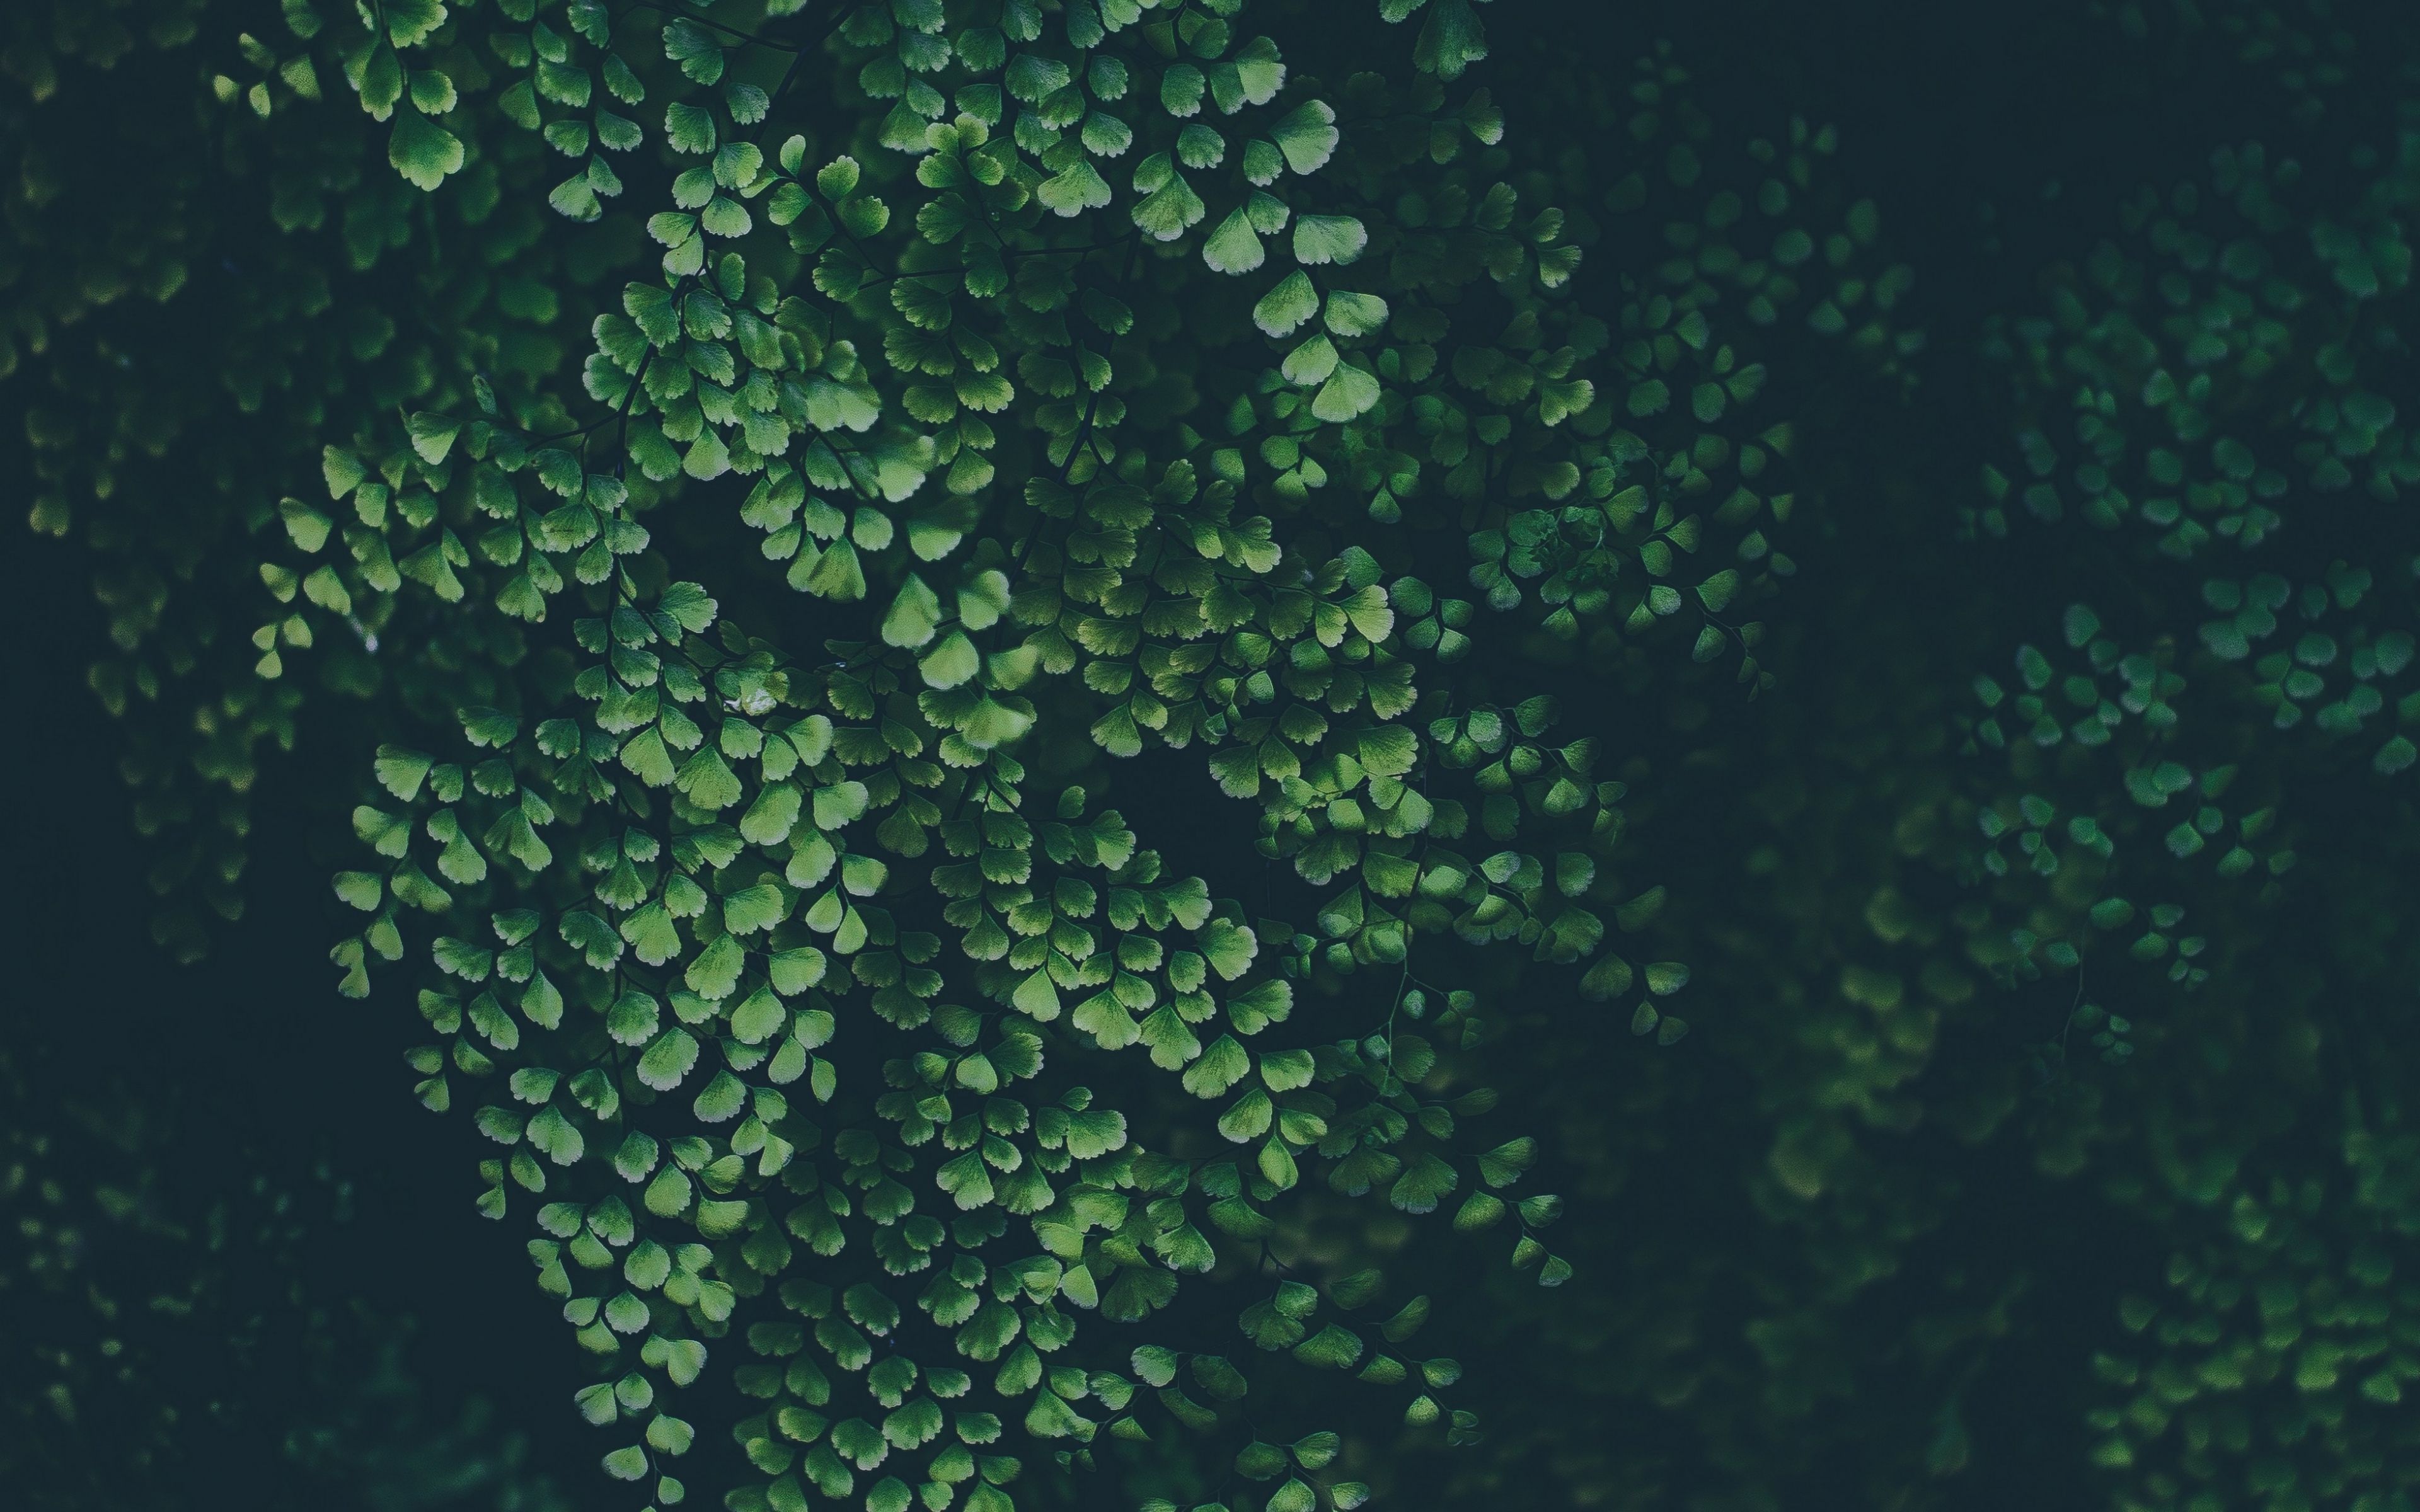 Download 3840x2400 wallpaper green leaves, clover, nature, plants, 4k, ultra HD 16: widescreen, 3840x2400 HD image, background, 4637